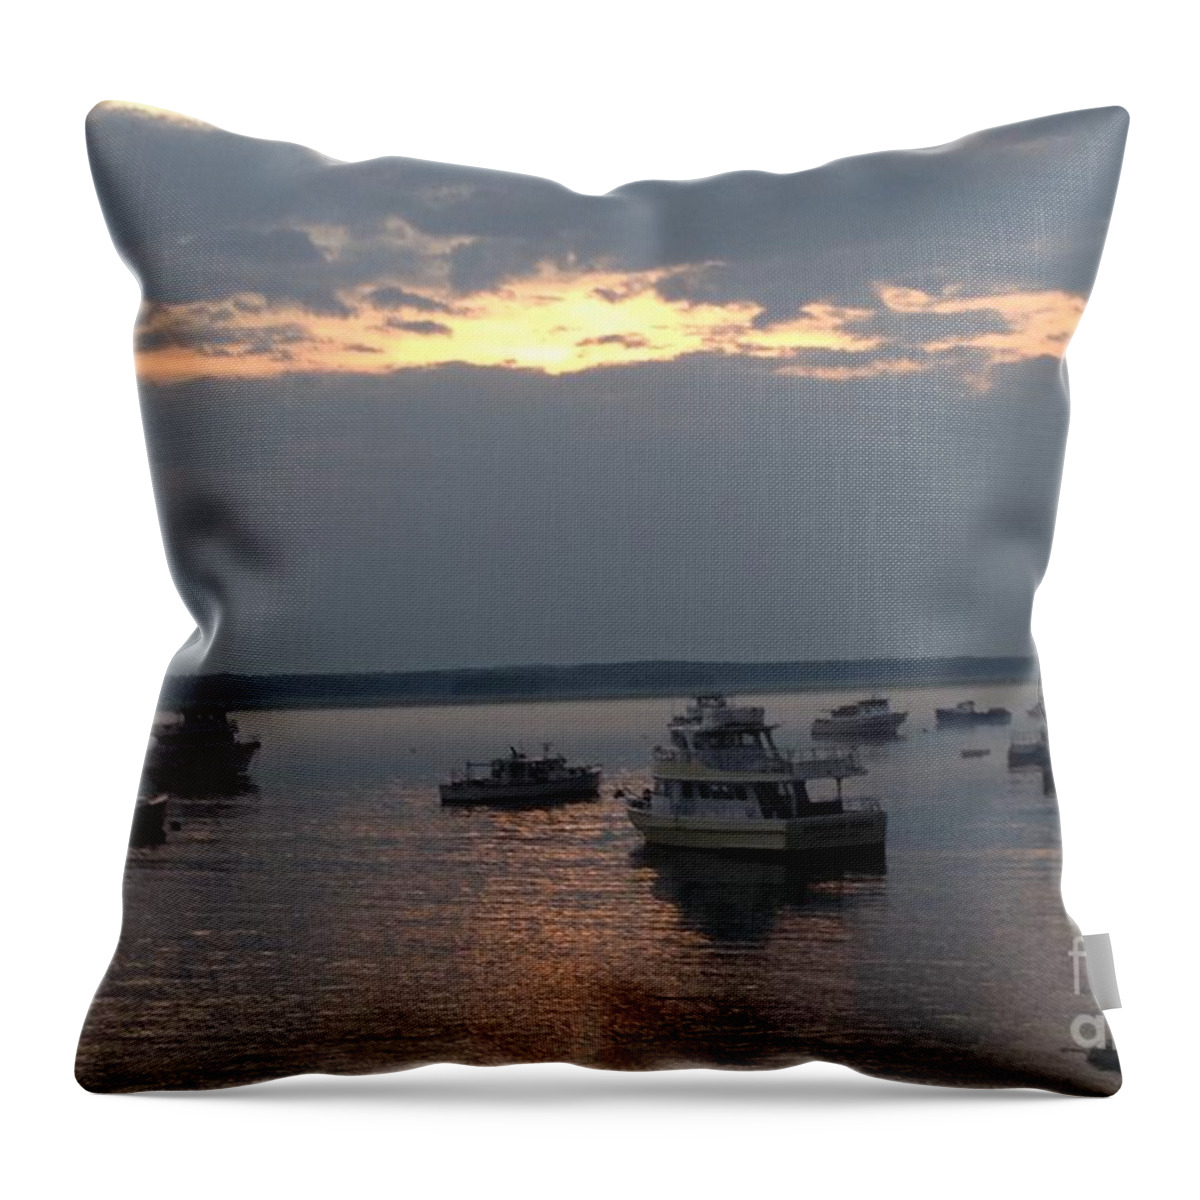 Boats Throw Pillow featuring the photograph Meeting by Deena Withycombe